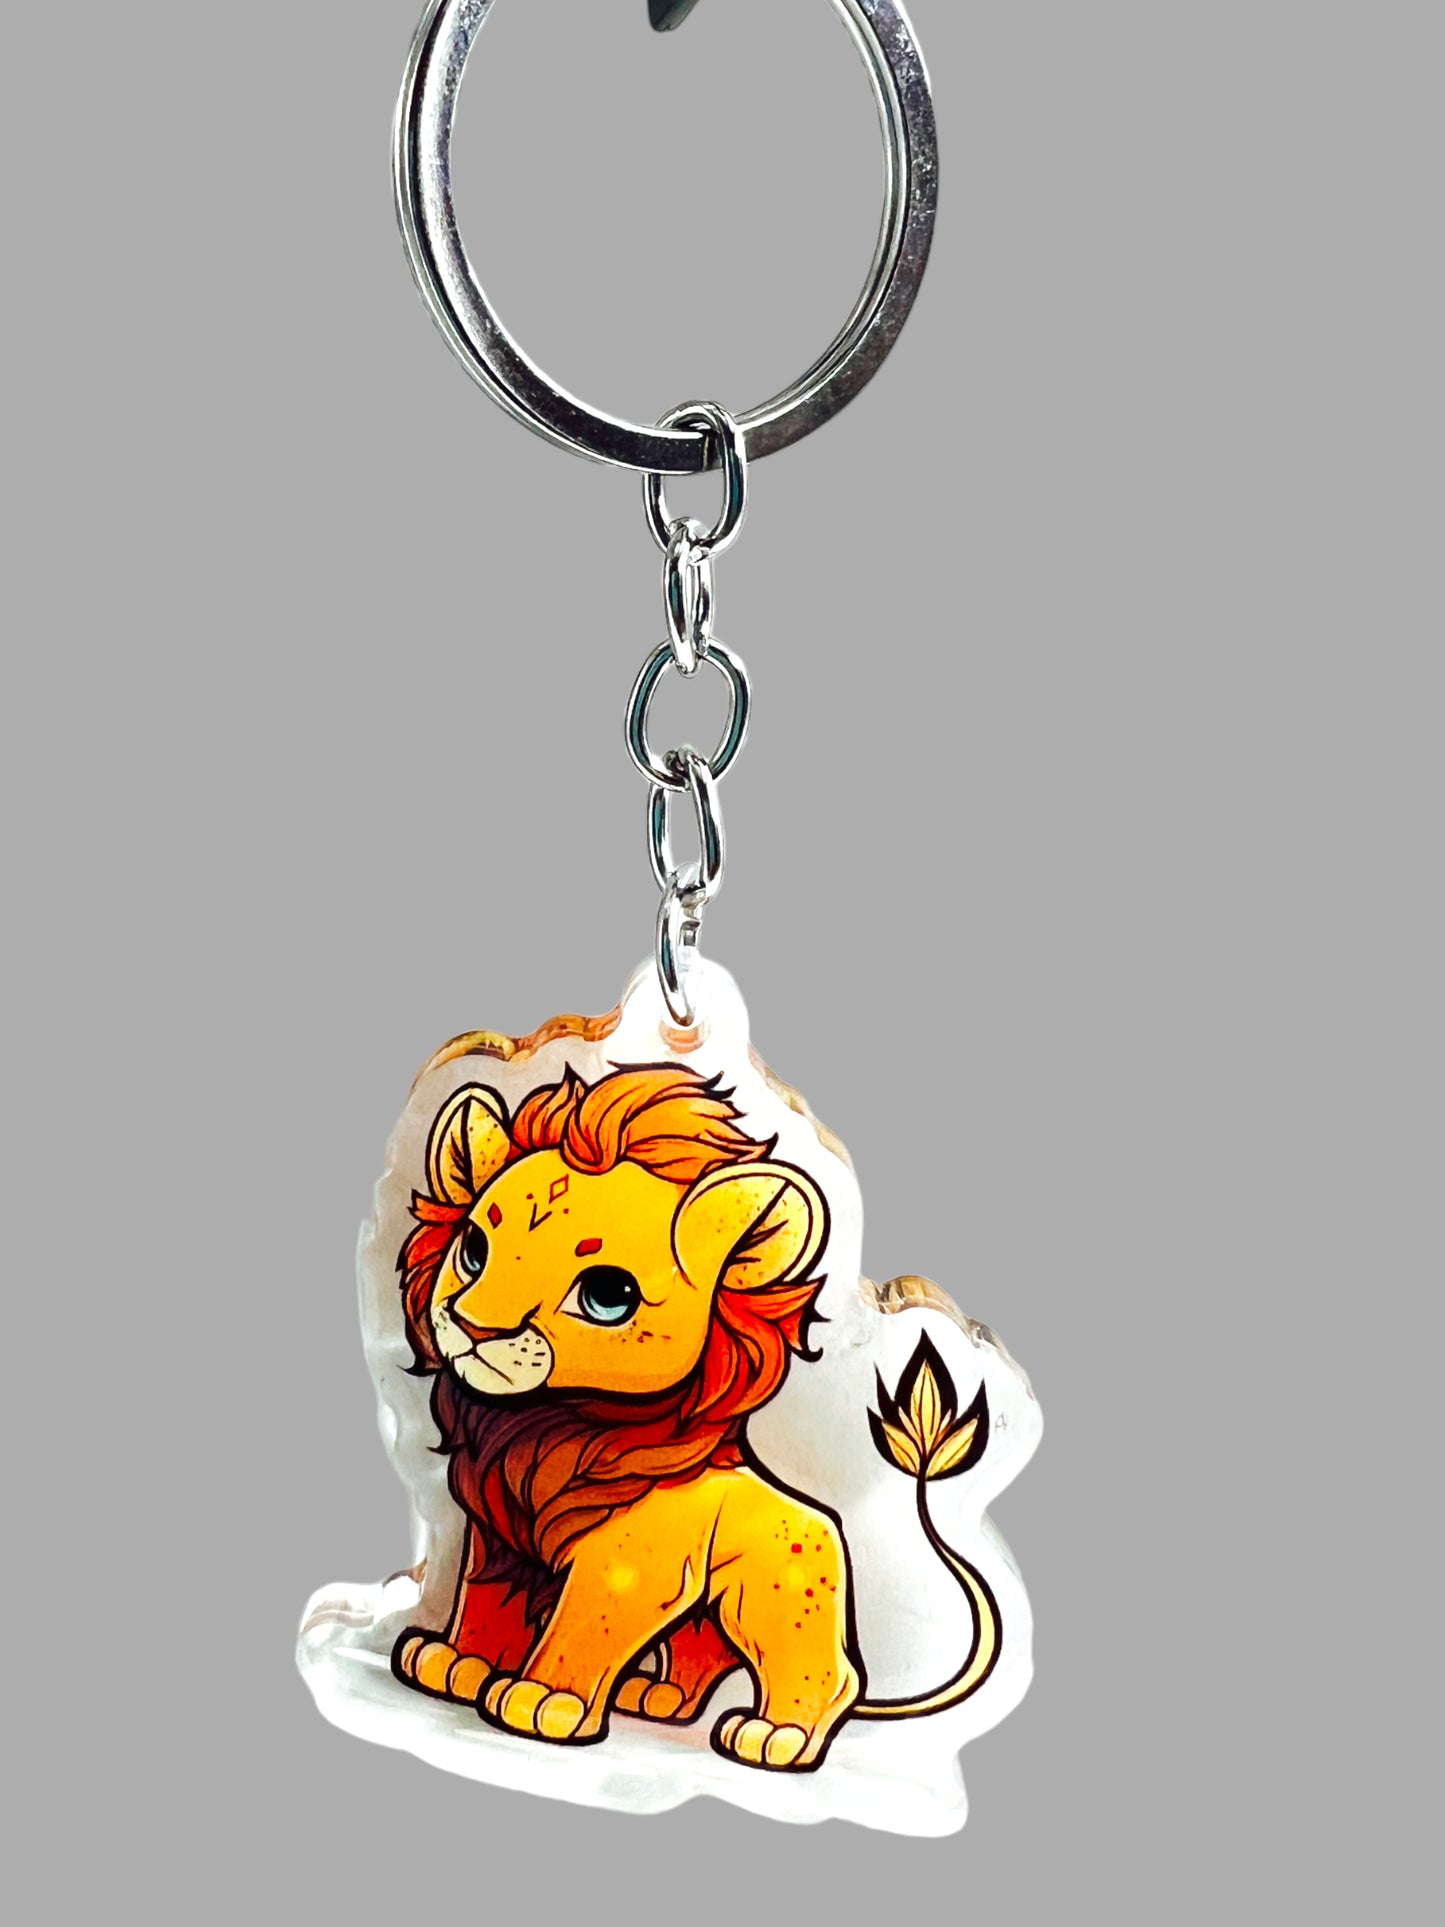 Lion Acrylic Keychain, Wildlife Cute kawaii memorial ornament, pet portrait charm gift  backpack fob, dad car décor, first day of school gift